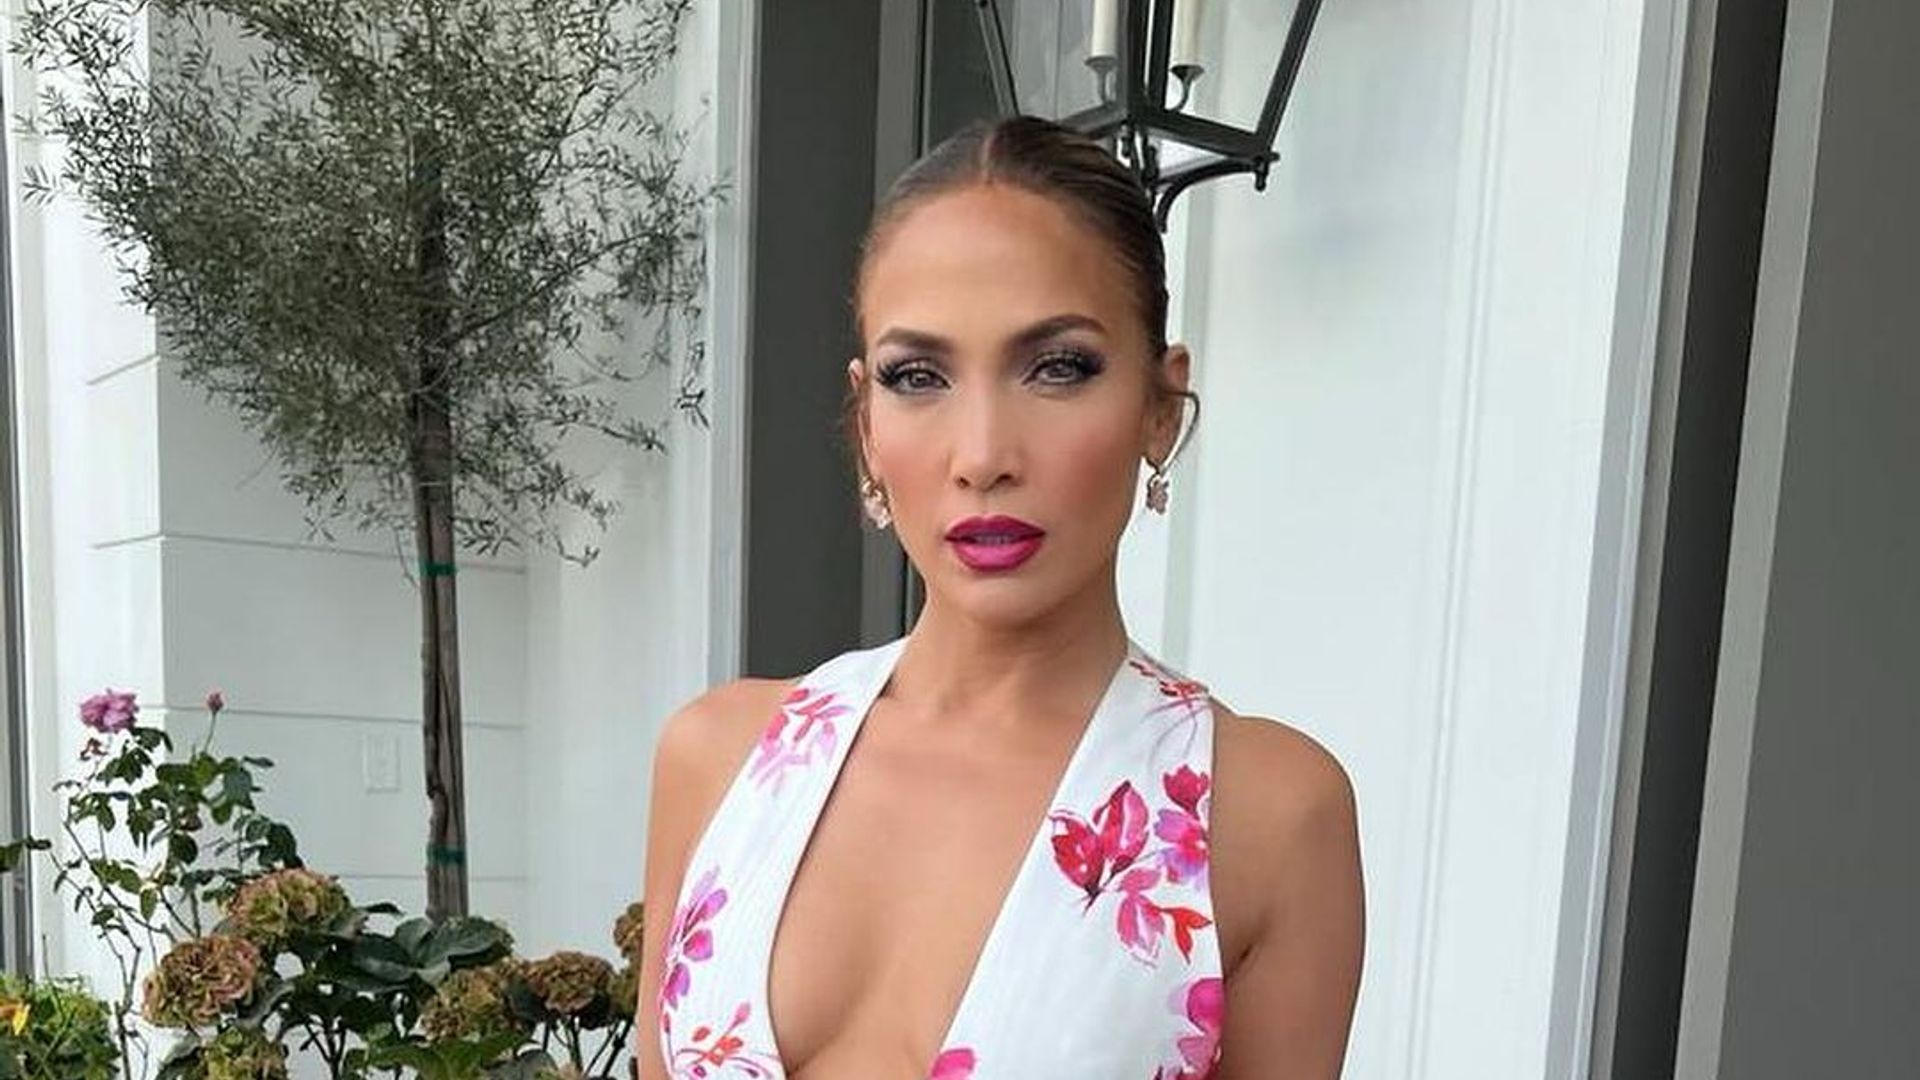 Jennifer Lopez, 54, turns heads in plunging floral frock at the Daytime Beauty Awards in Hollywood